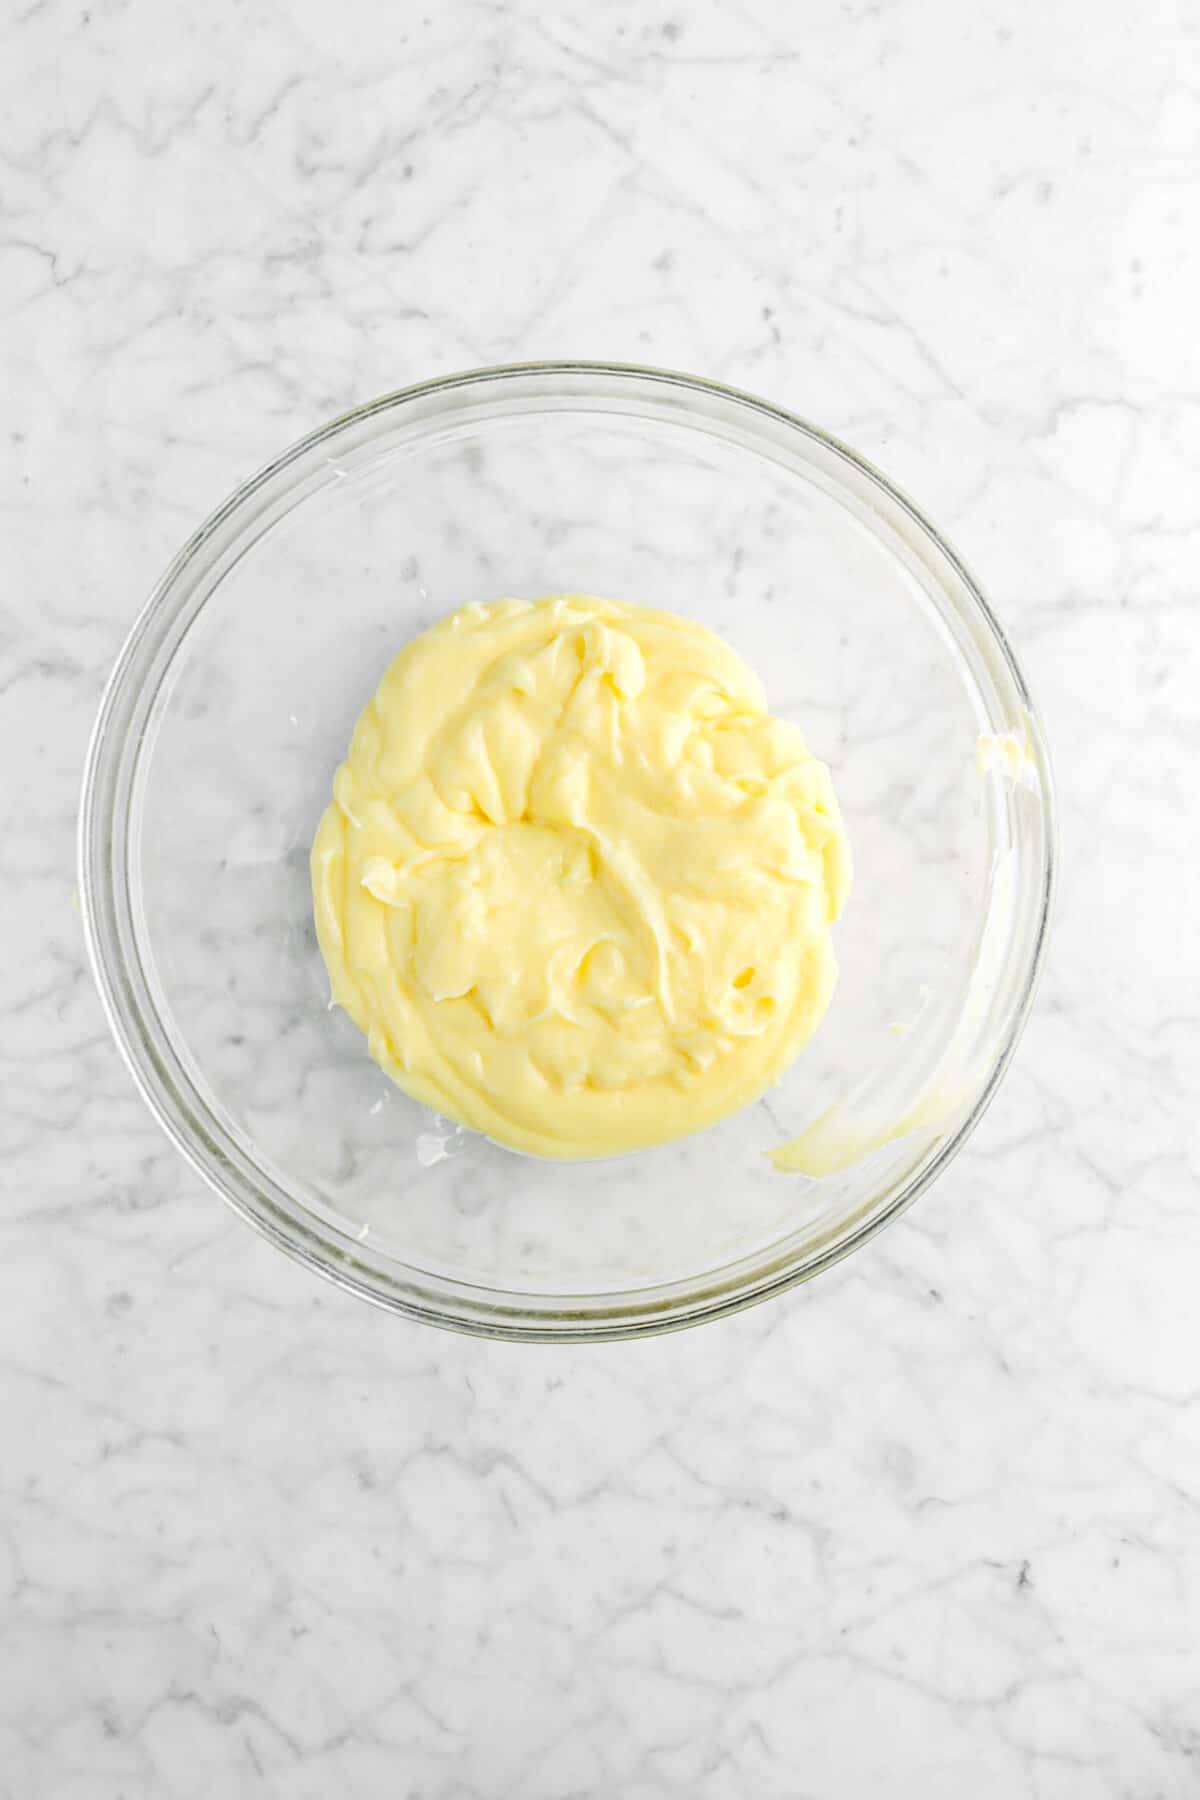 pastry cream in a glass bowl